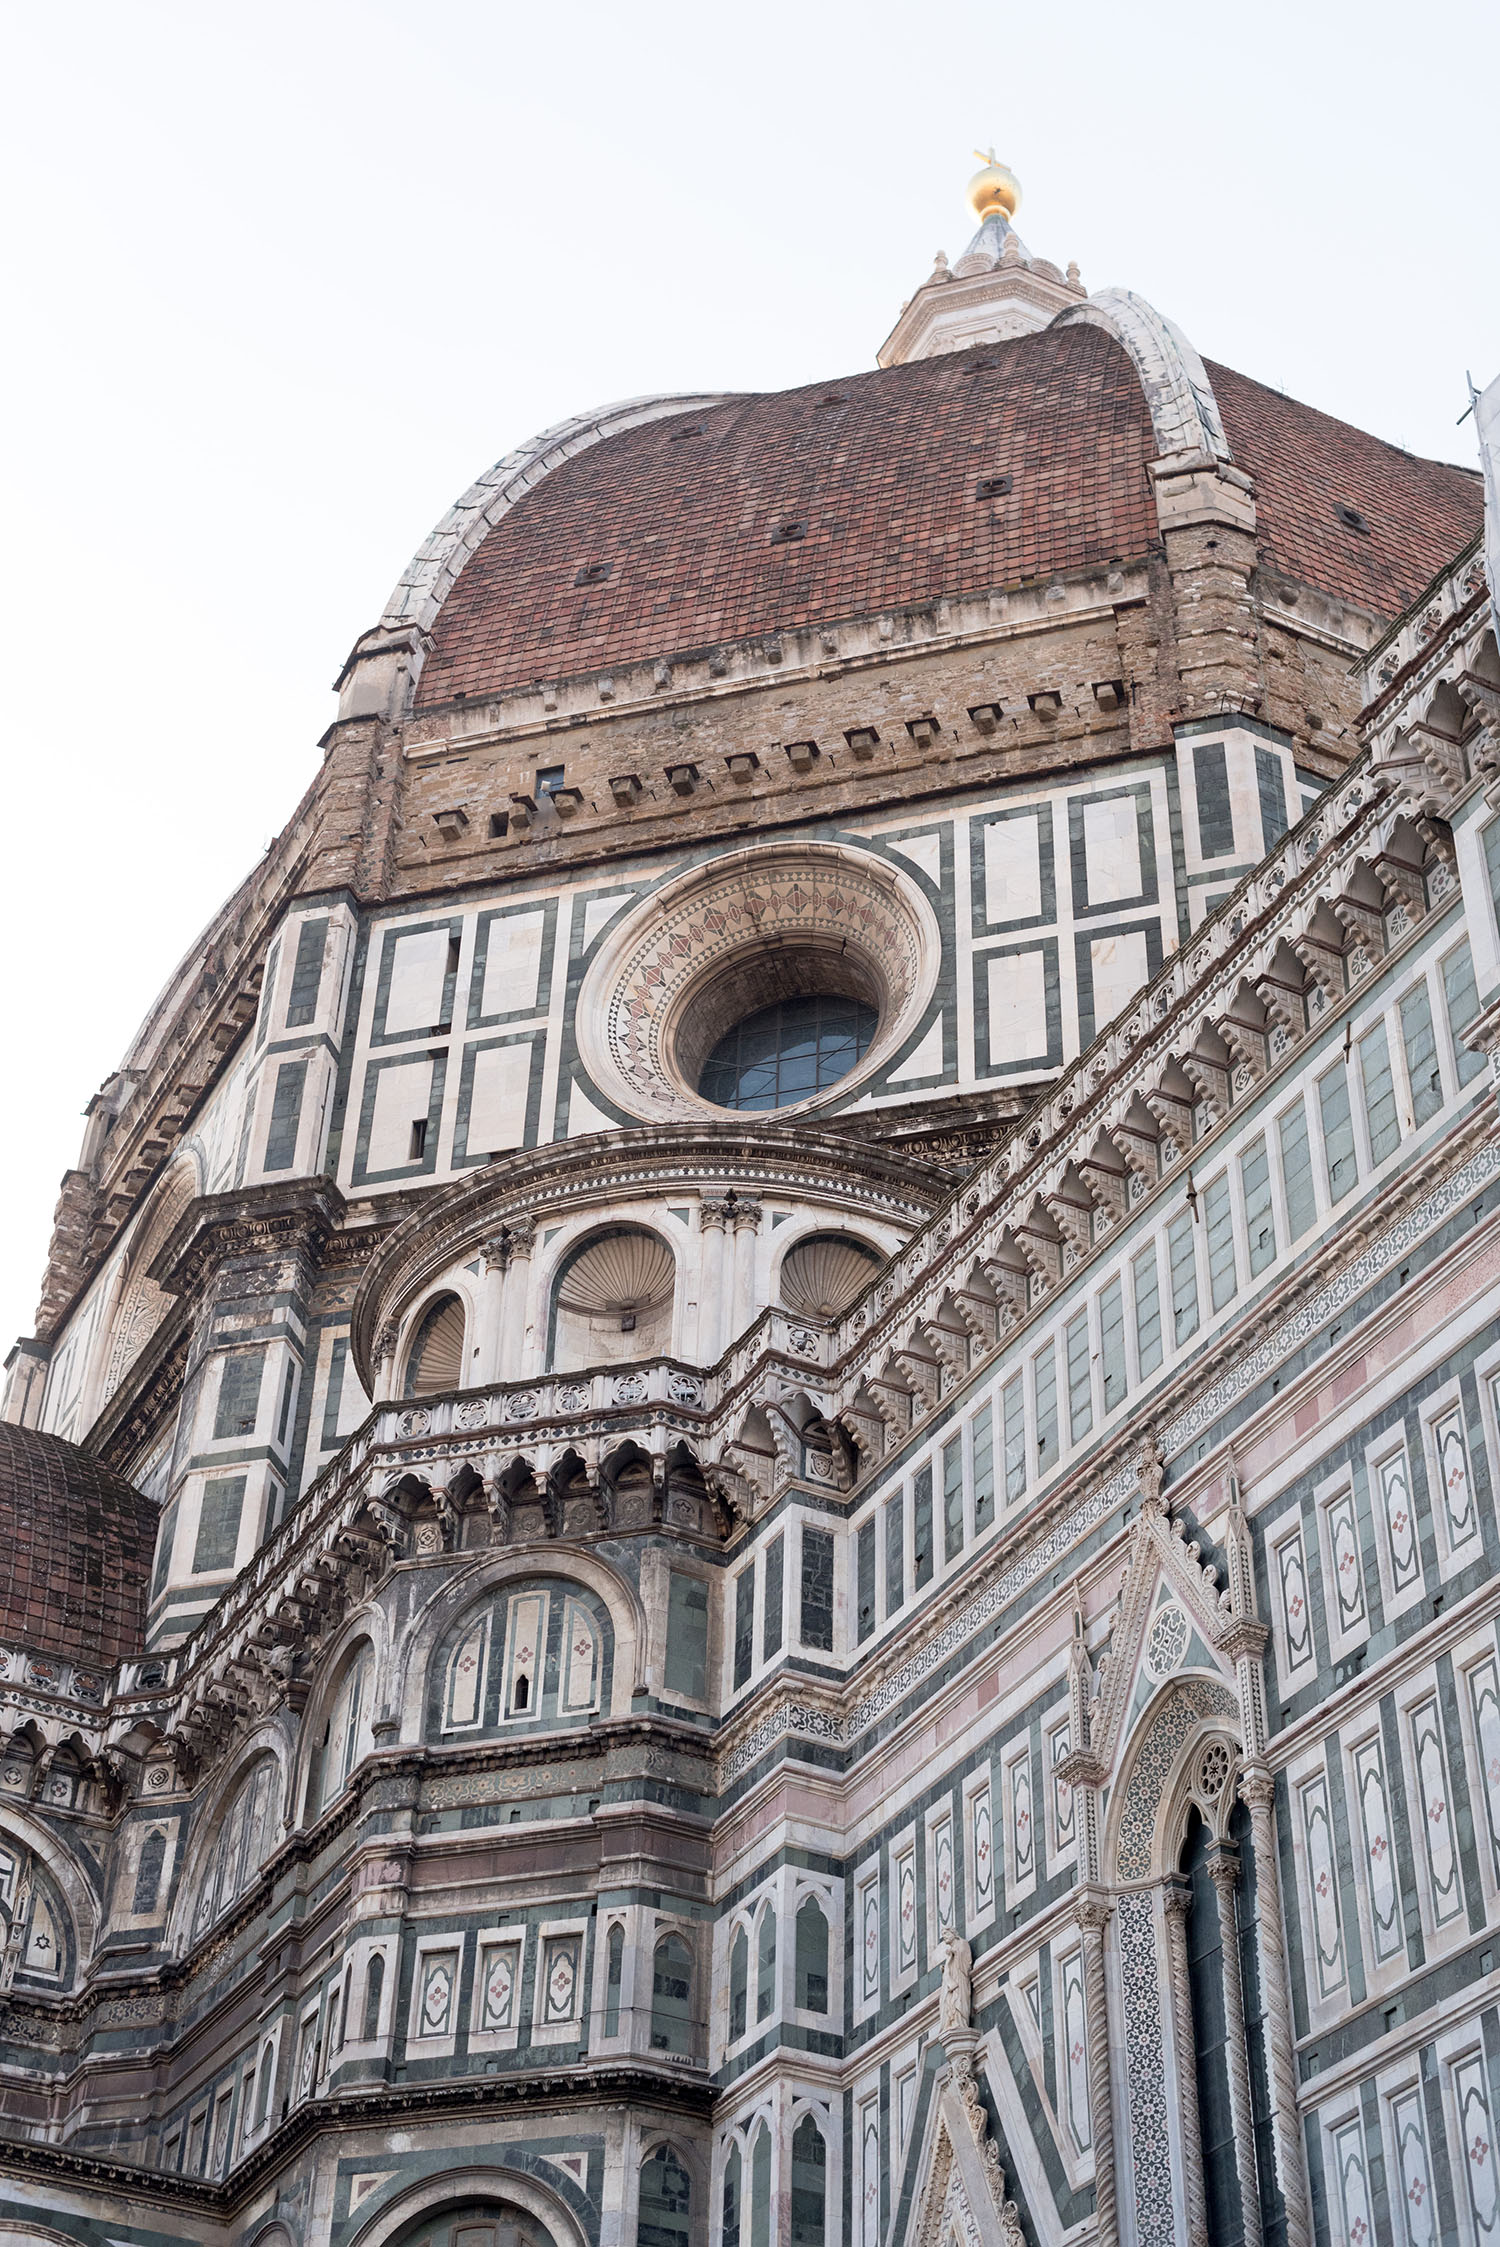 The Duomo in Florence, Italy, as photographed by top Canadian travel blogger Cee Fardoe of Coco & Vera